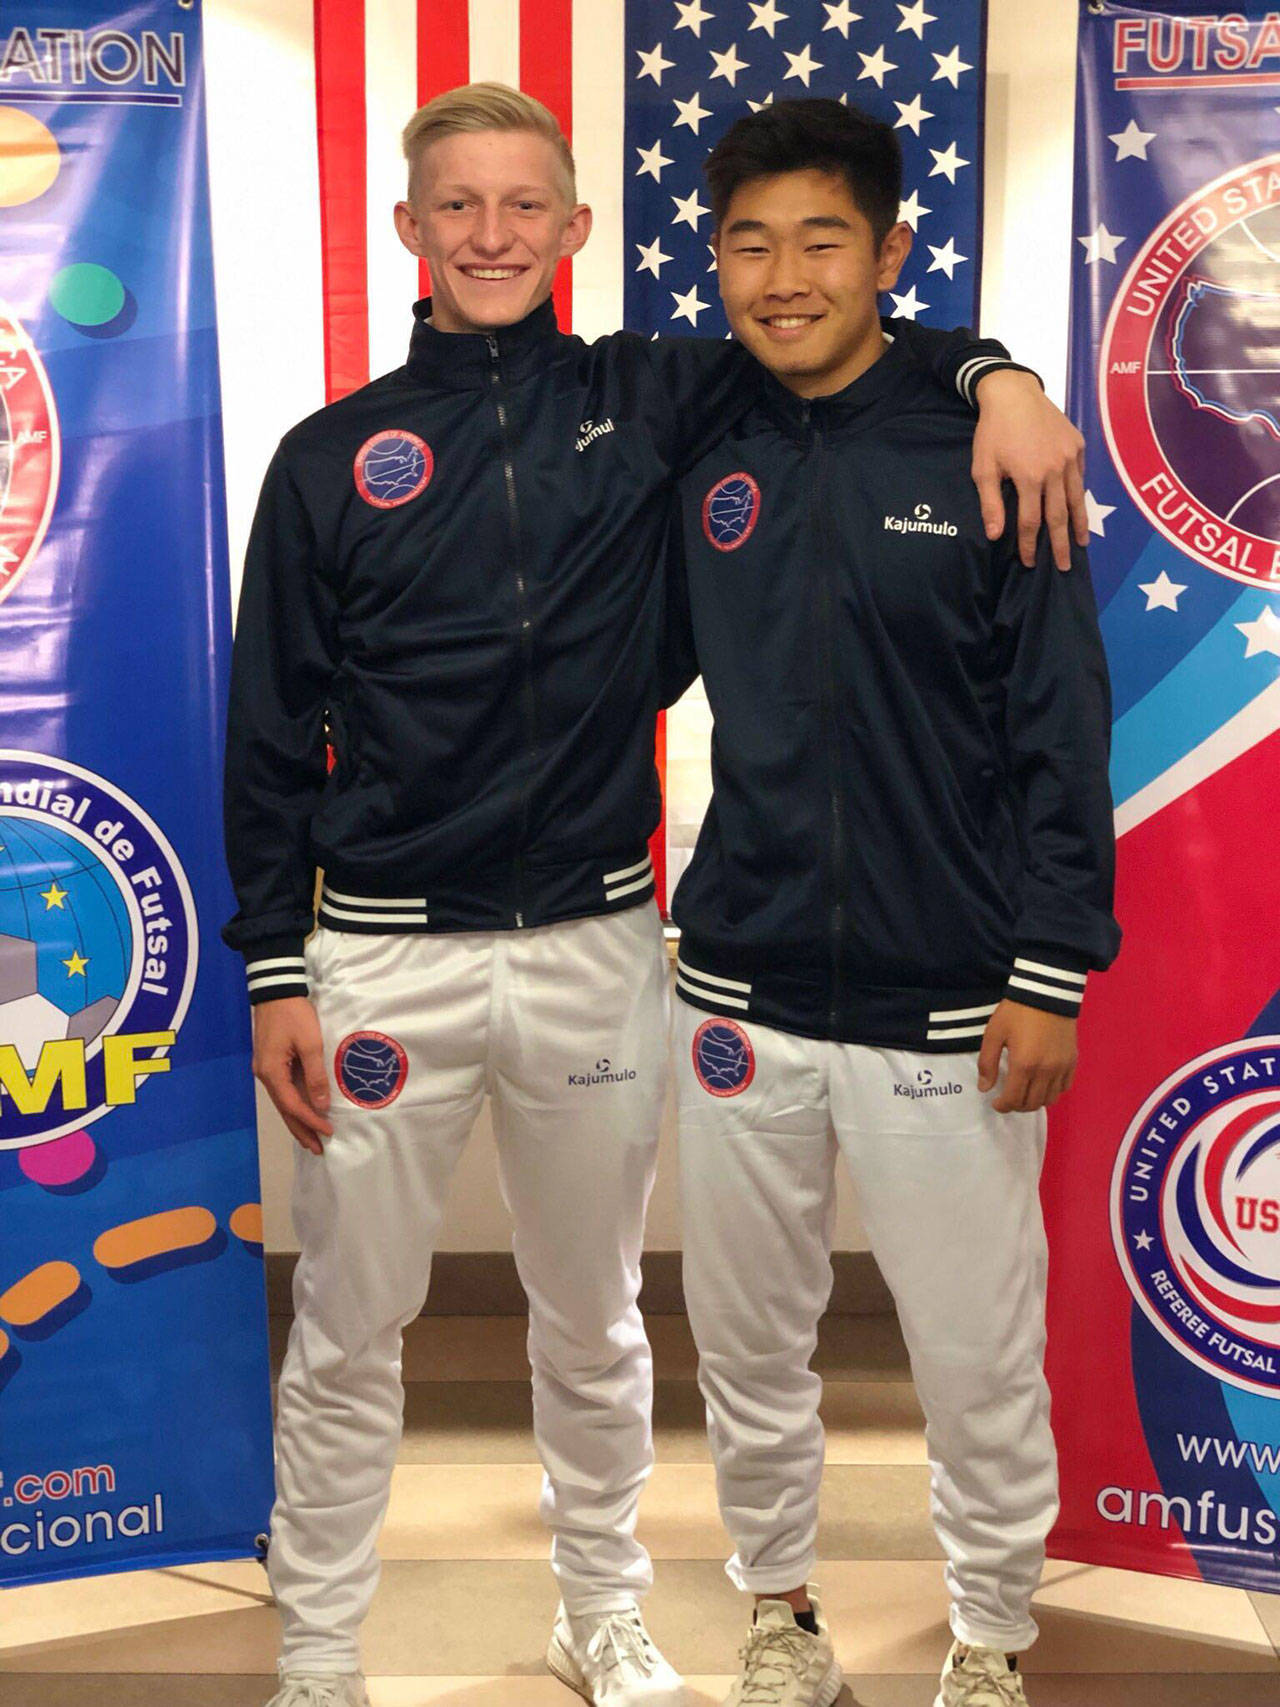 South Whidbey’s Julian Inches, left, and Graham Colar played on the United States’ team in the U-20 futsal World Cup in November. (Submitted photo)